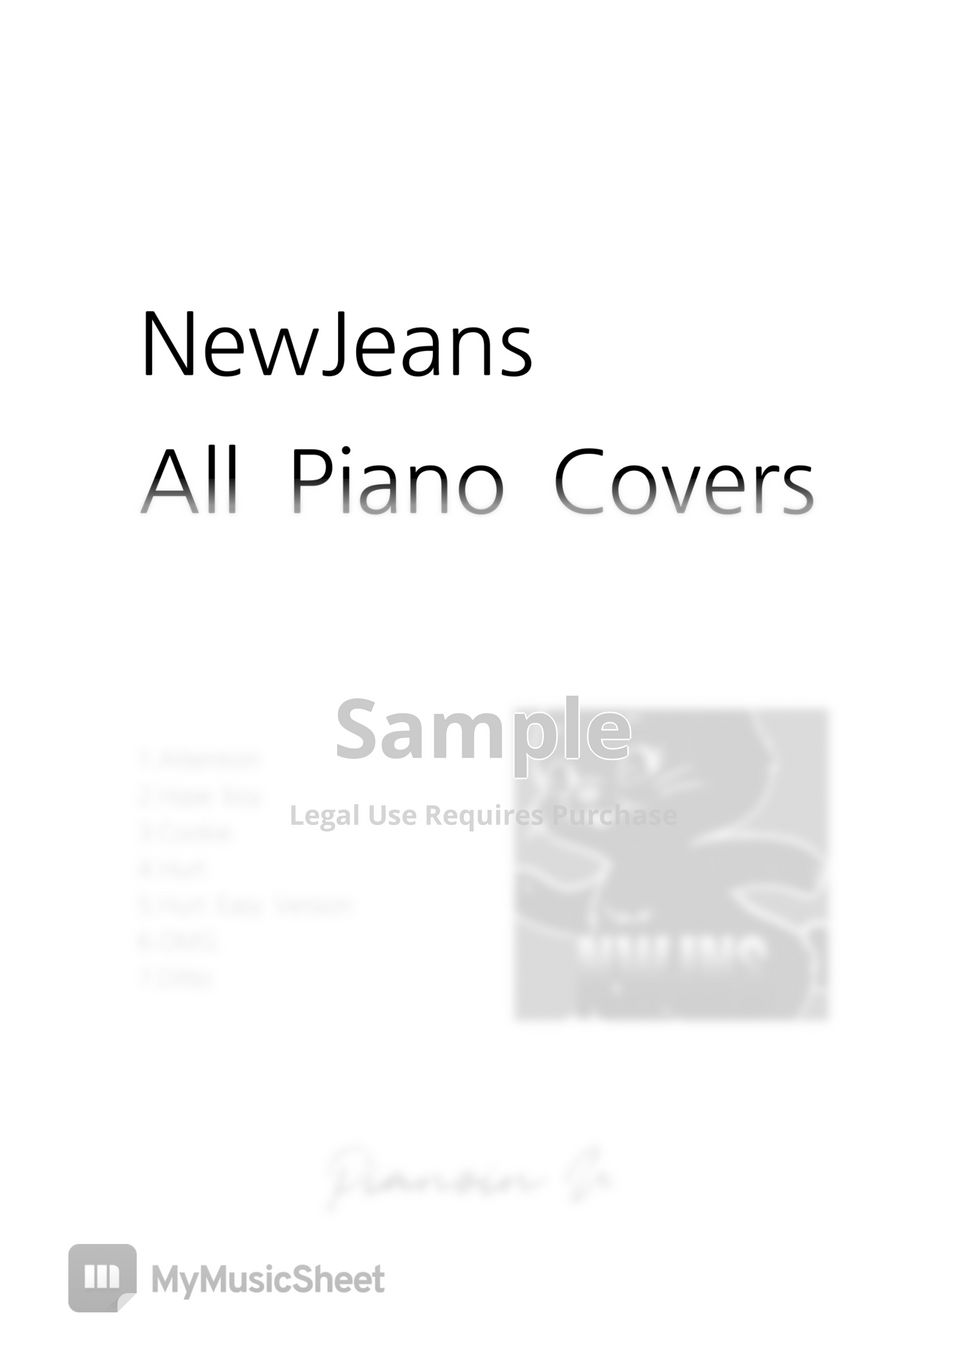 NewJeans(뉴진스) - NewJeans All piano covers (6songs and Easy Version included.) by PIANOiNU